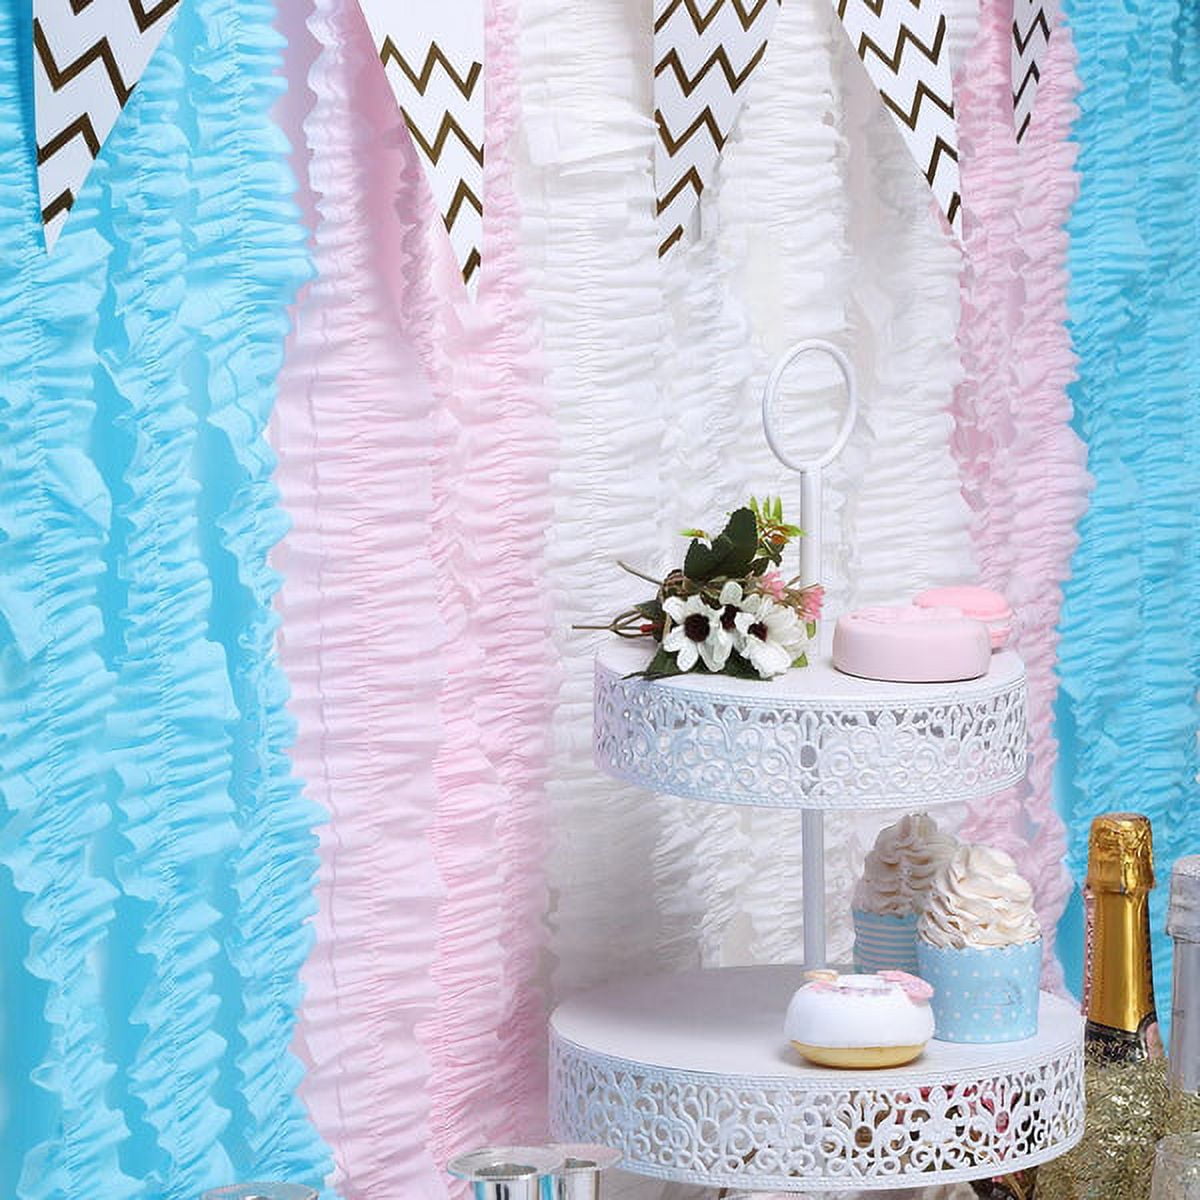 Ruffled Crepe Paper Roll For Party Streamers/Backdrop (300cm x 7cm